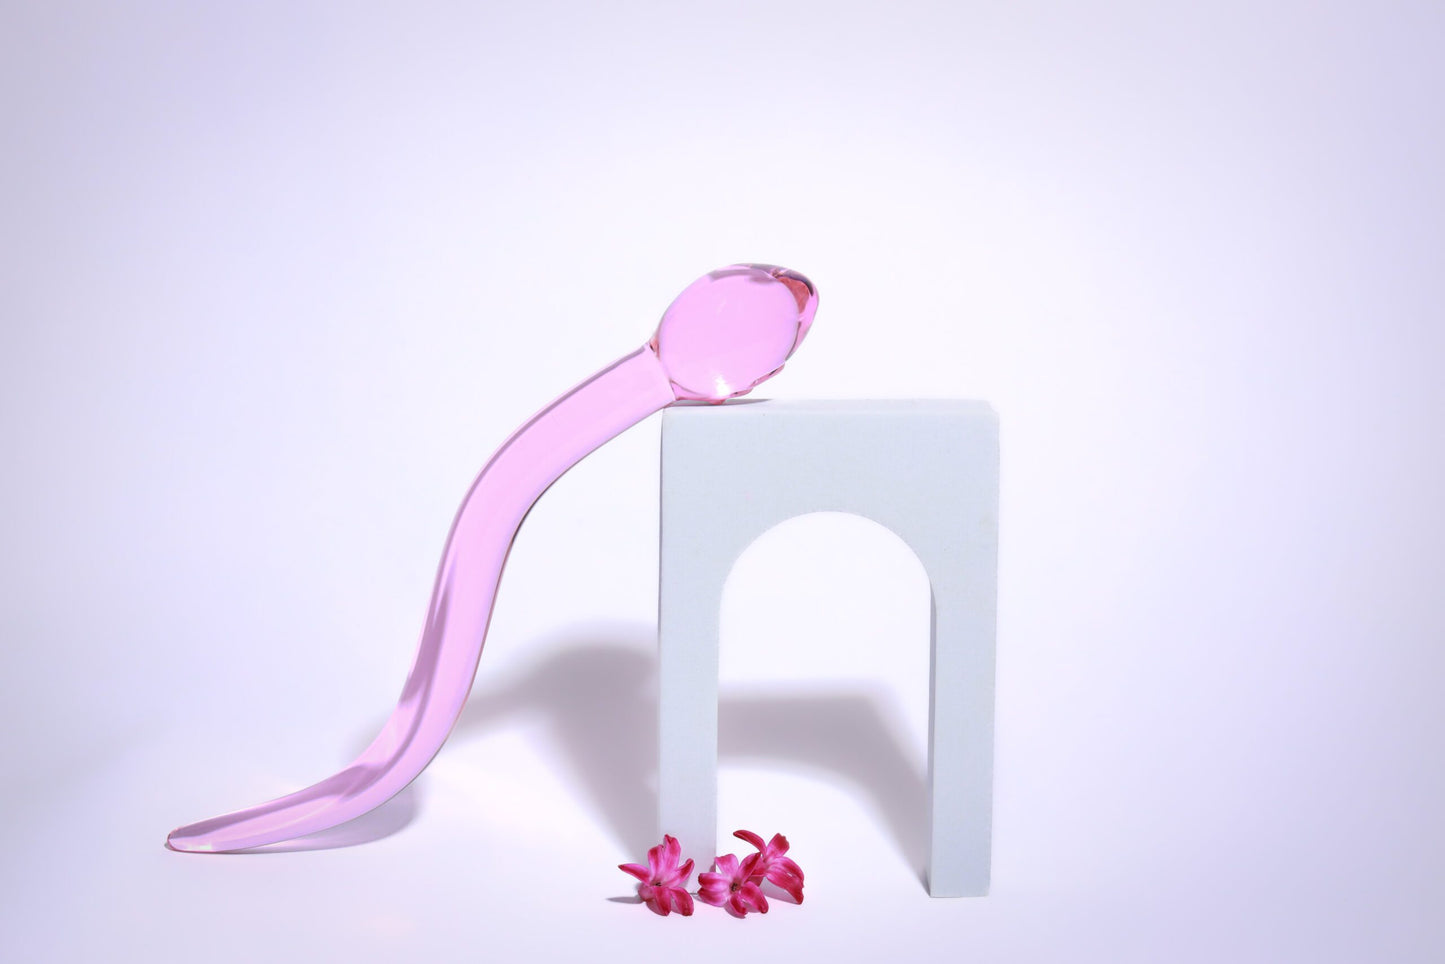 Calypso Cervix Wand™ 2.0 Glass Dildo - Pink Candy Floss (Limited Edition)